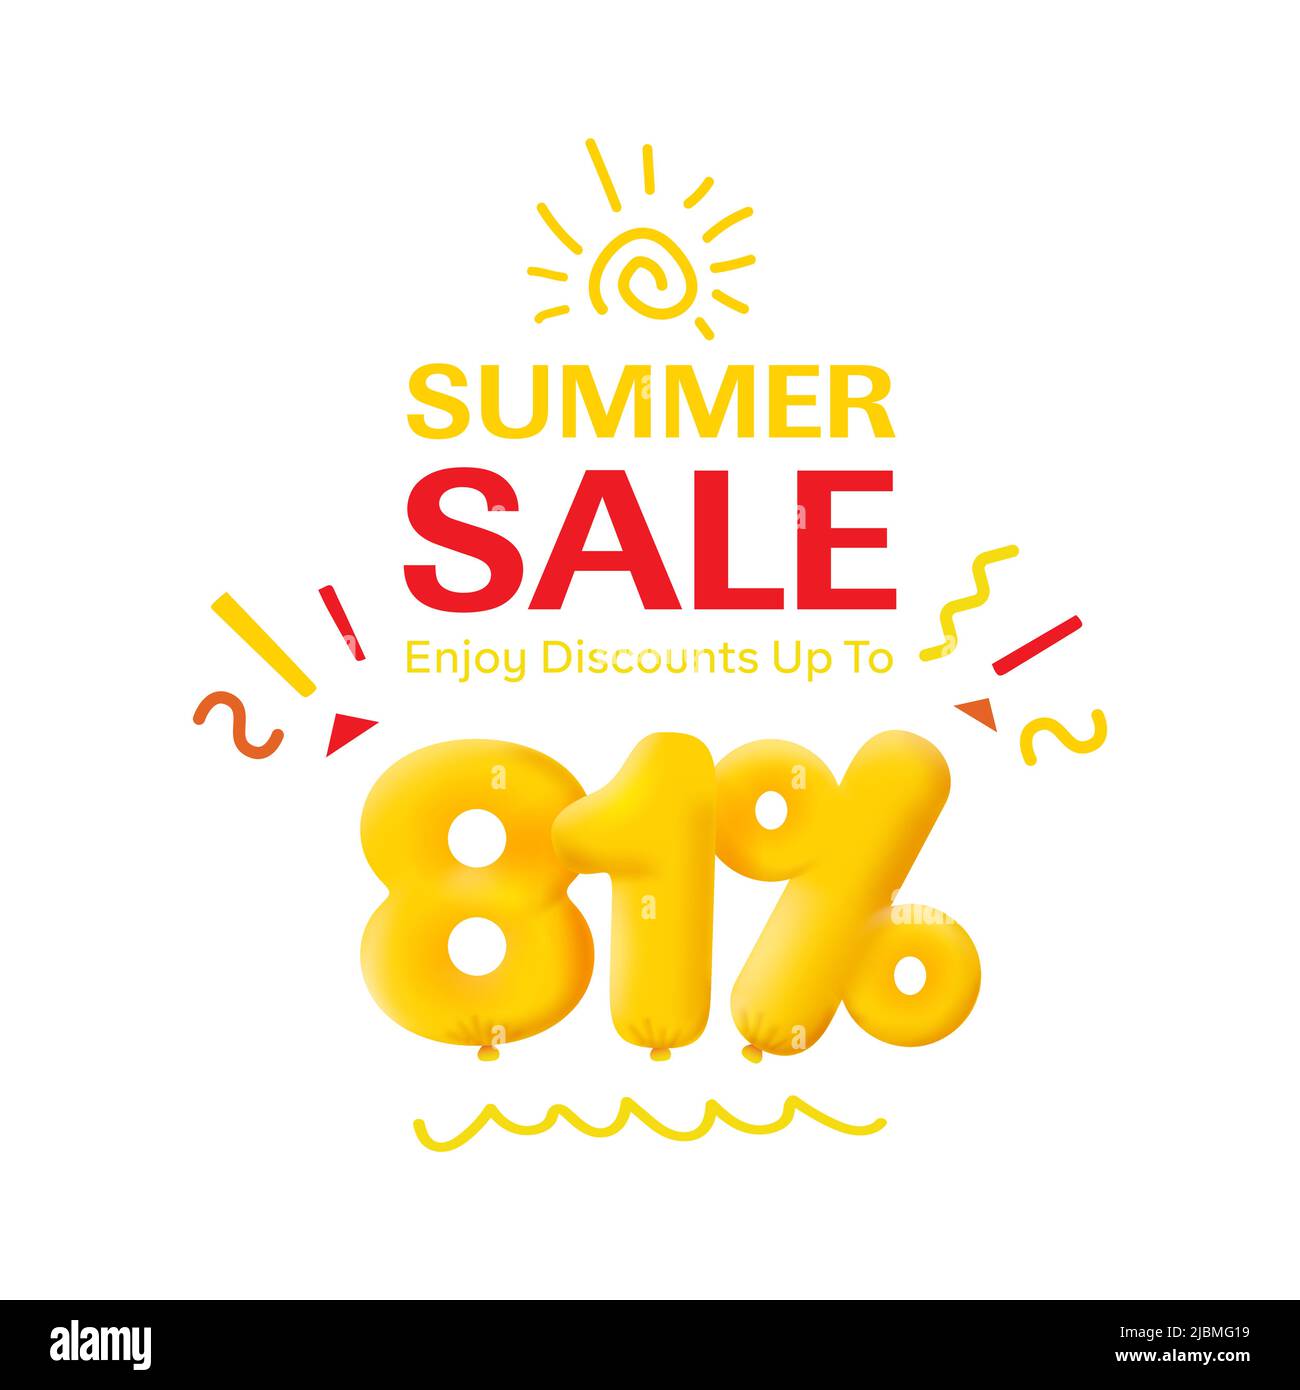 Special offer sale 81% discount 3D number Yellow tag voucher vector illustration. Discount season label 81 percent off promotion advertising summer sale coupon promo marketing banner holiday weekend Stock Vector